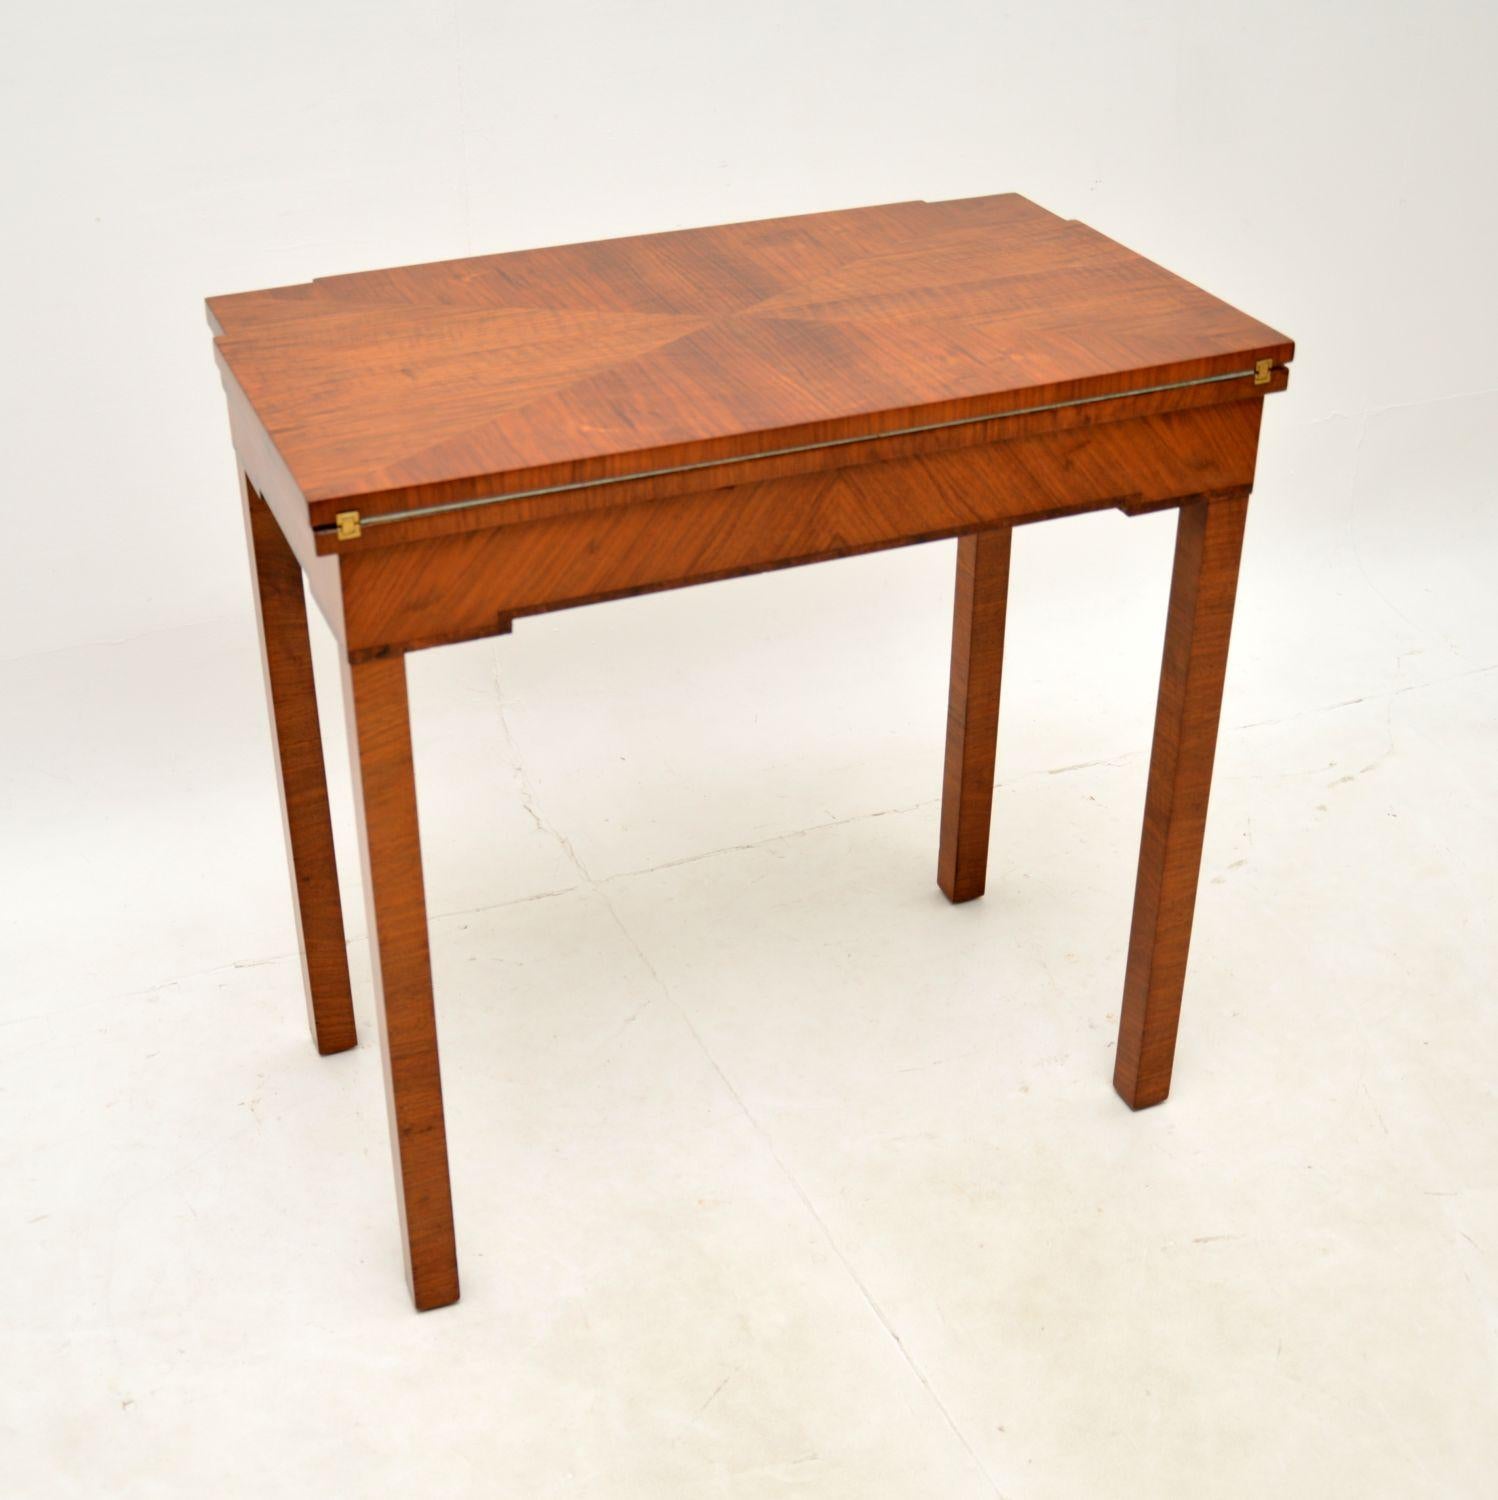 A stylish and extremely well made Art Deco walnut card table. This was made in England, it dates from the 1920-30’s.

It is of superb quality, with a gorgeous breakfront design. The top is segmented figured walnut, the edges and legs are also